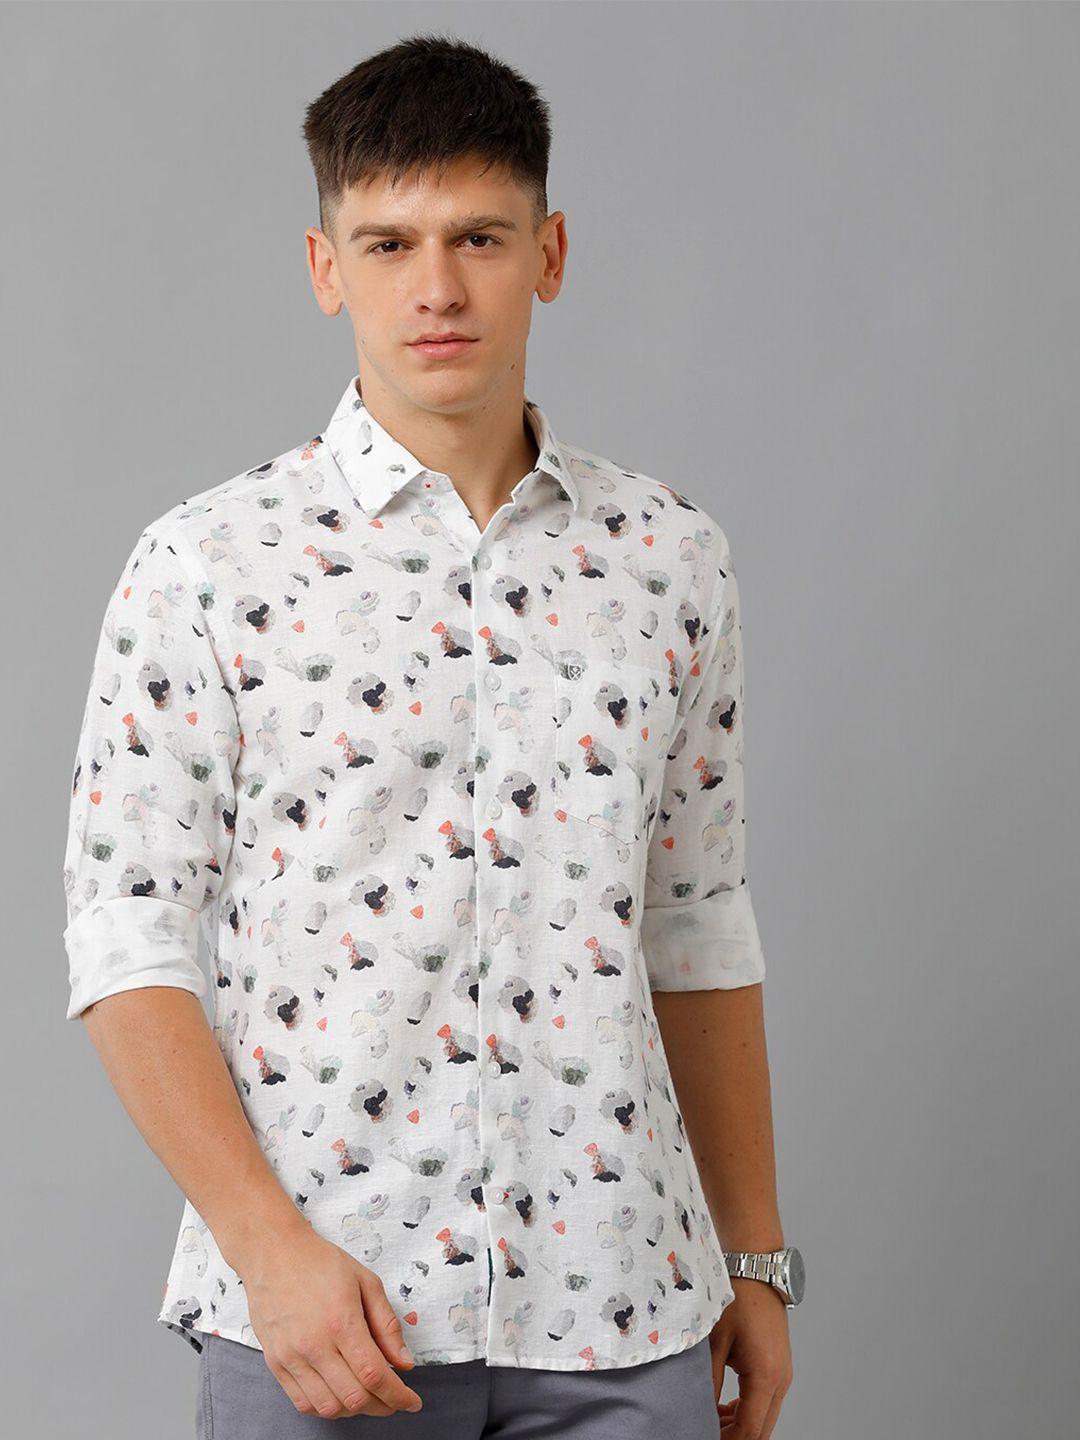 linen club abstract printed pure linen casual shirt